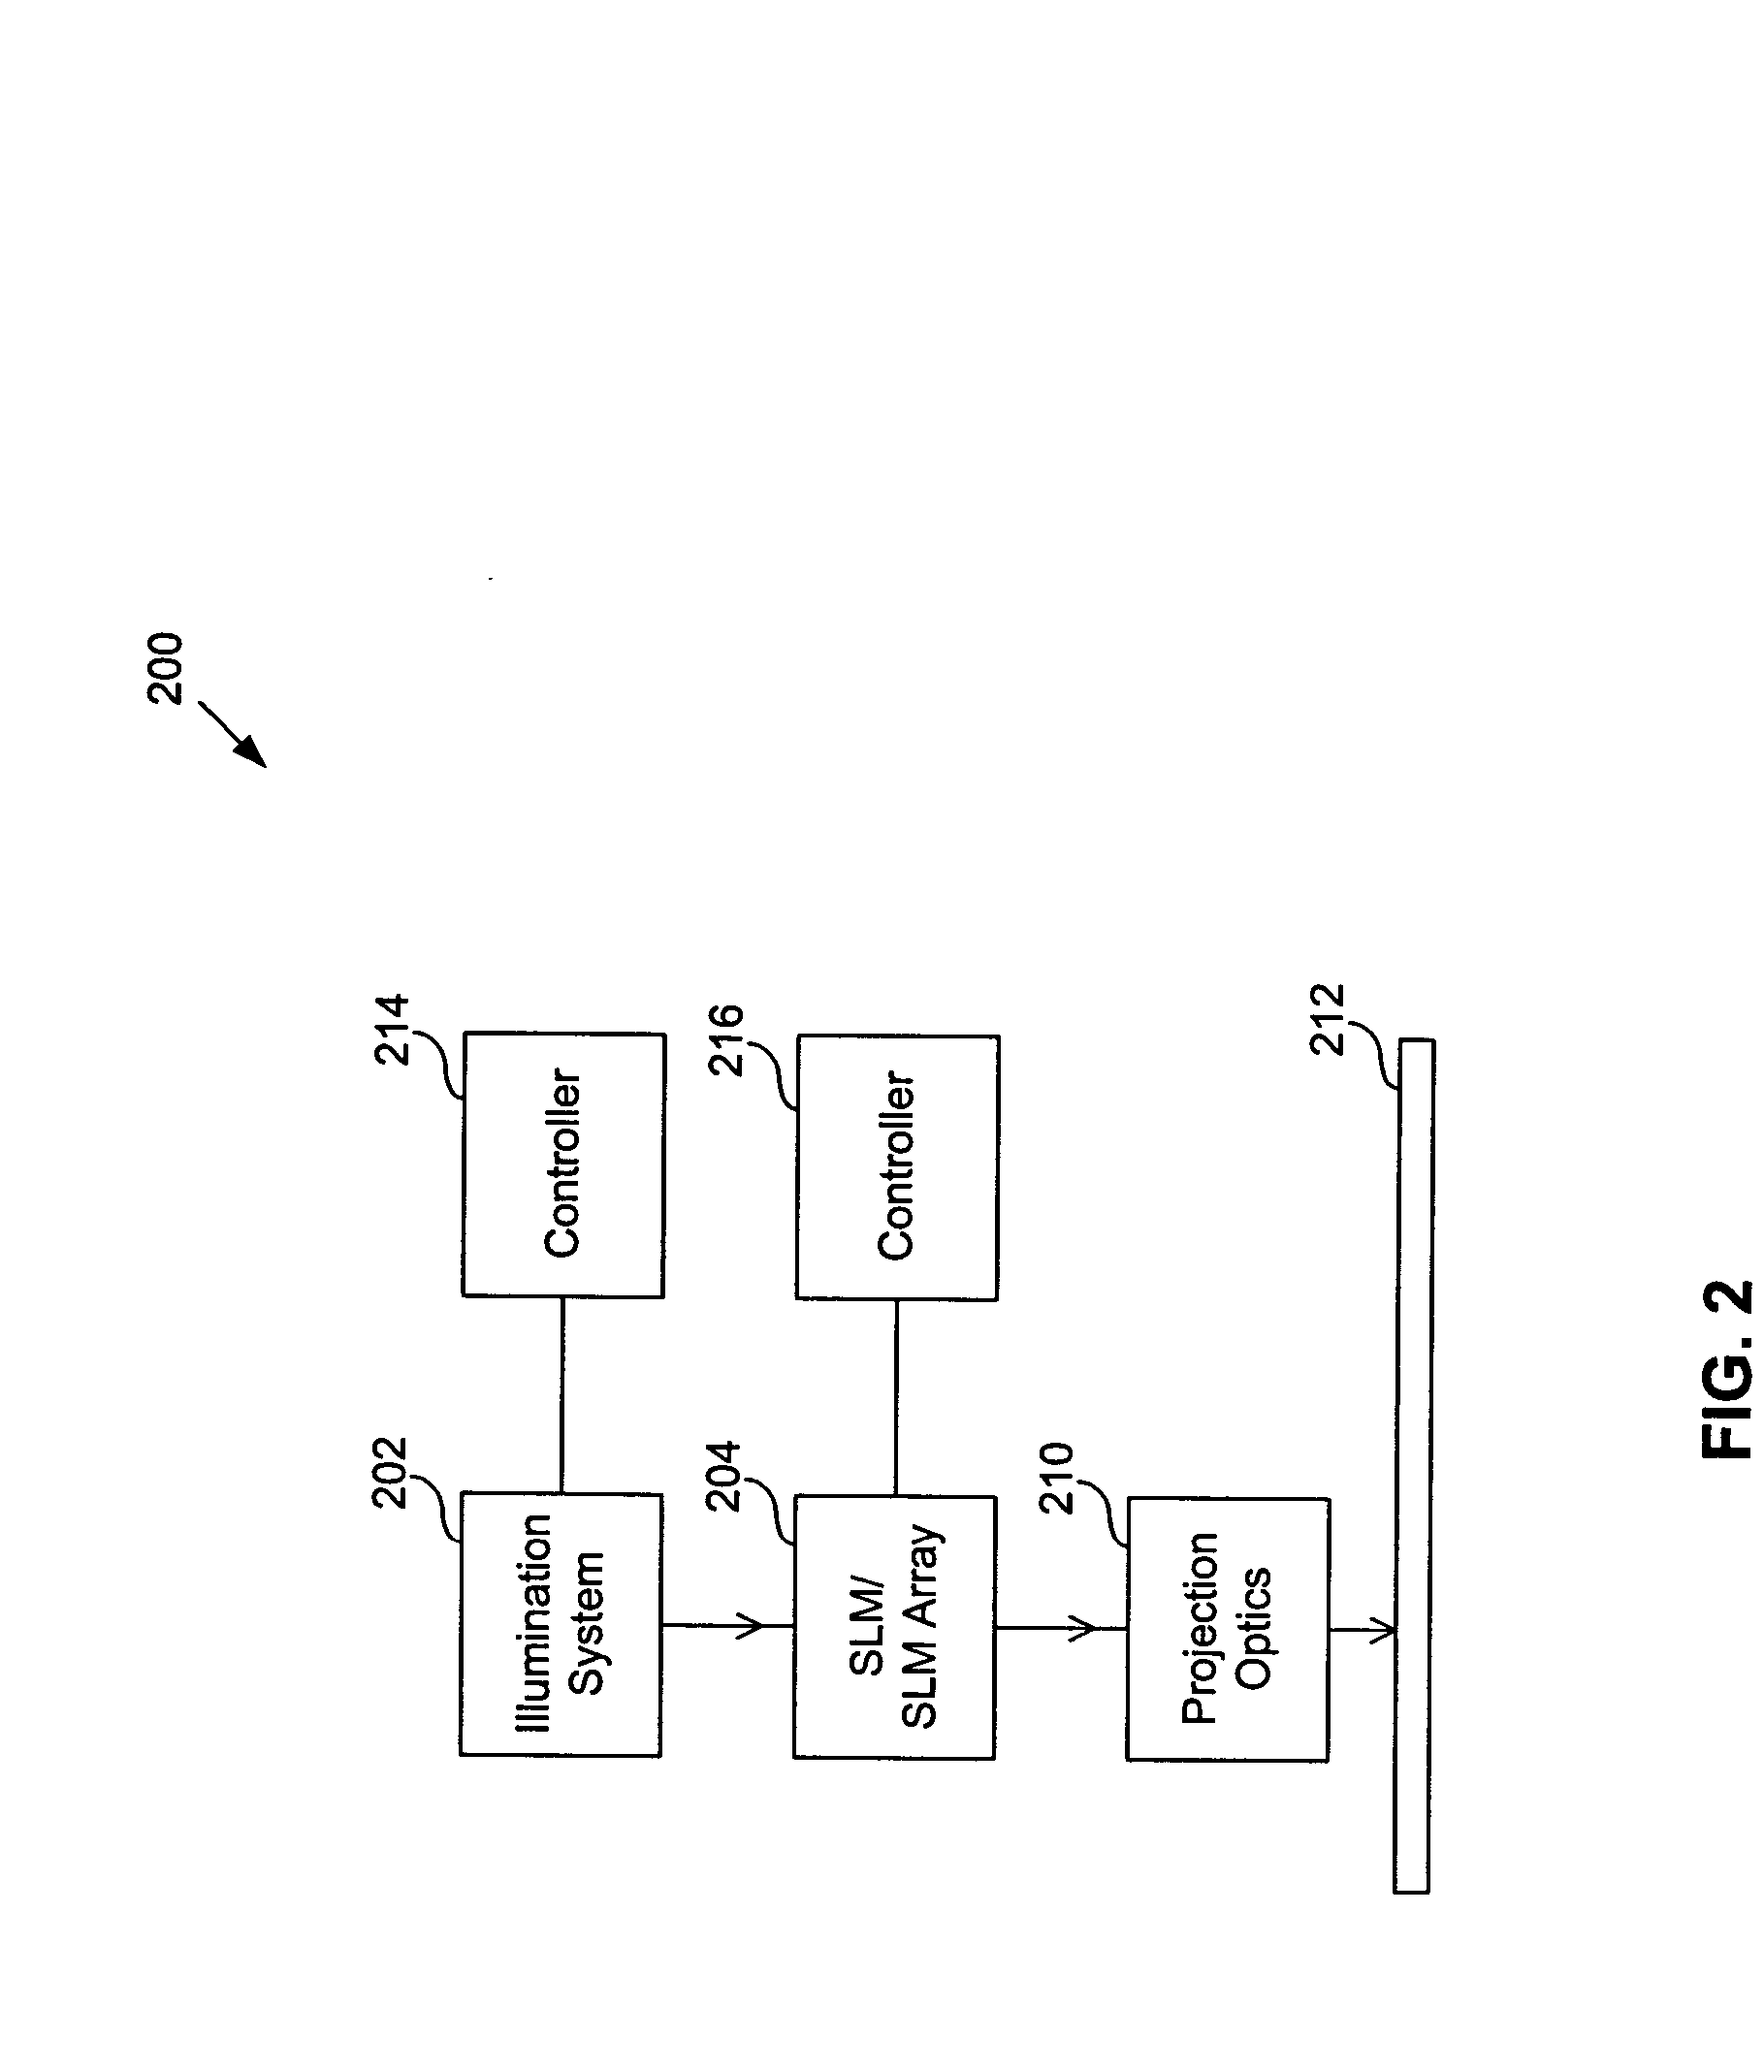 Method and systems for total focus deviation adjustments on maskless lithography systems